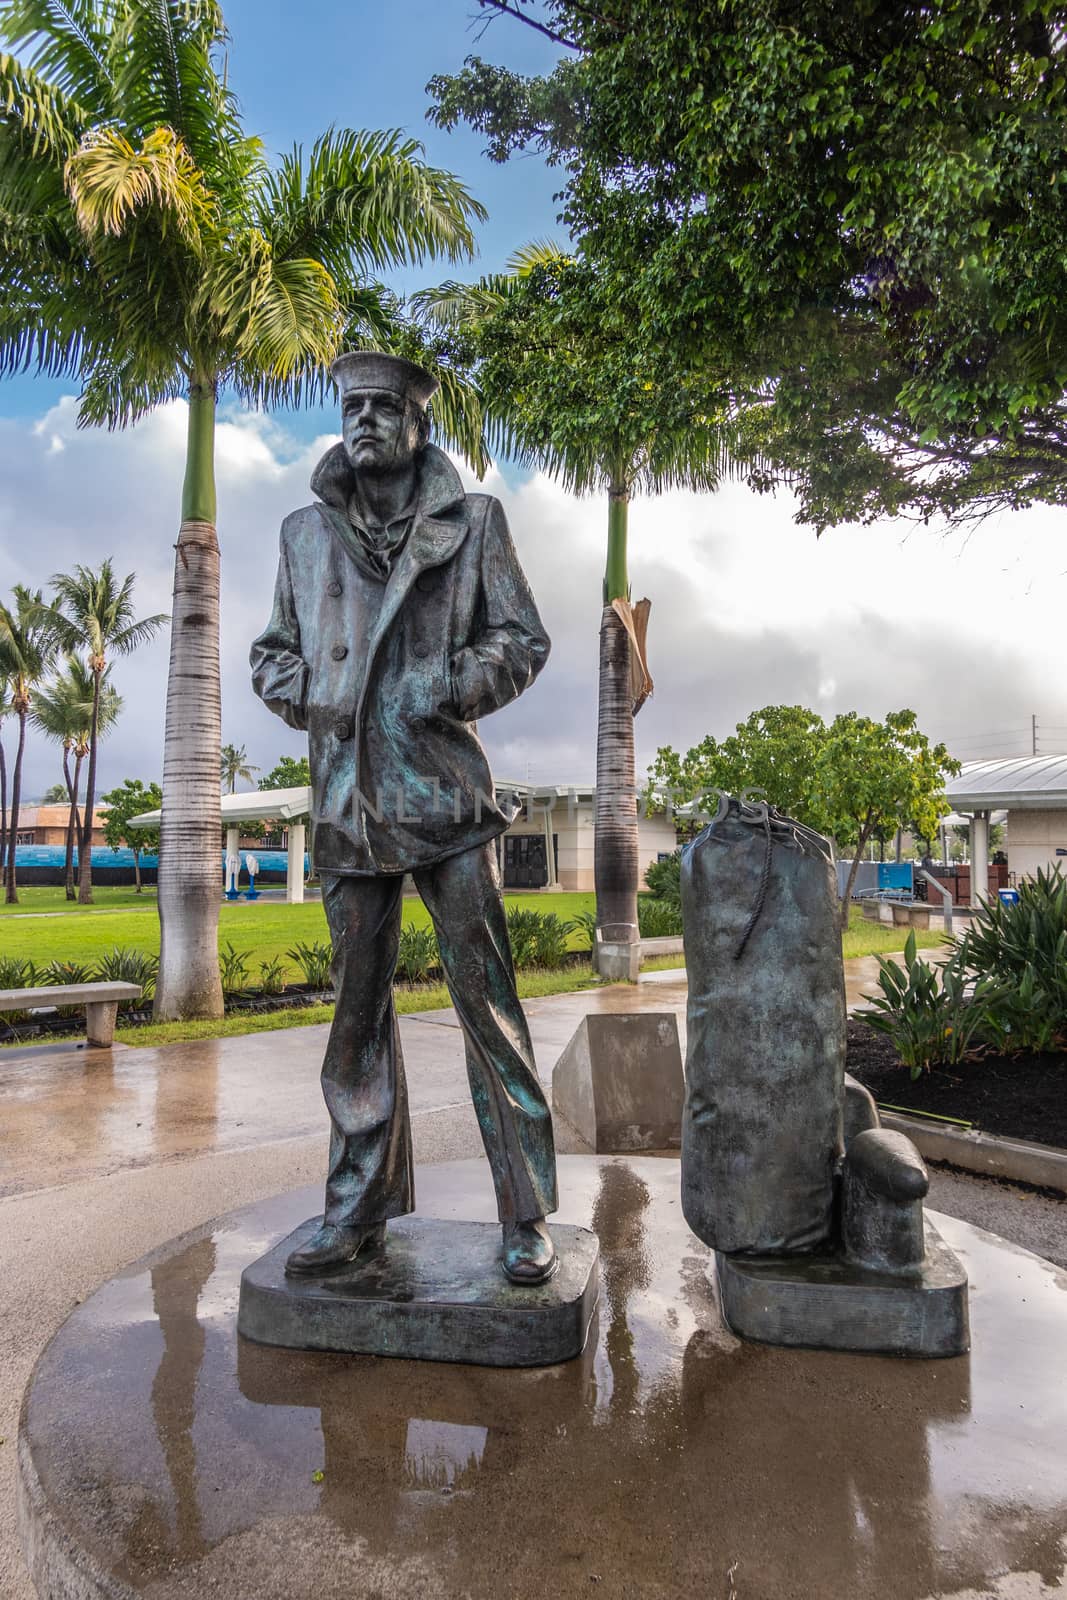 Oahu, Hawaii, USA. - January 10, 2020: Pearl Harbor. Wet Lone waiting sailor bronze statue under green foliage and blue cloudscape. Wet surface around and green lawn in back.